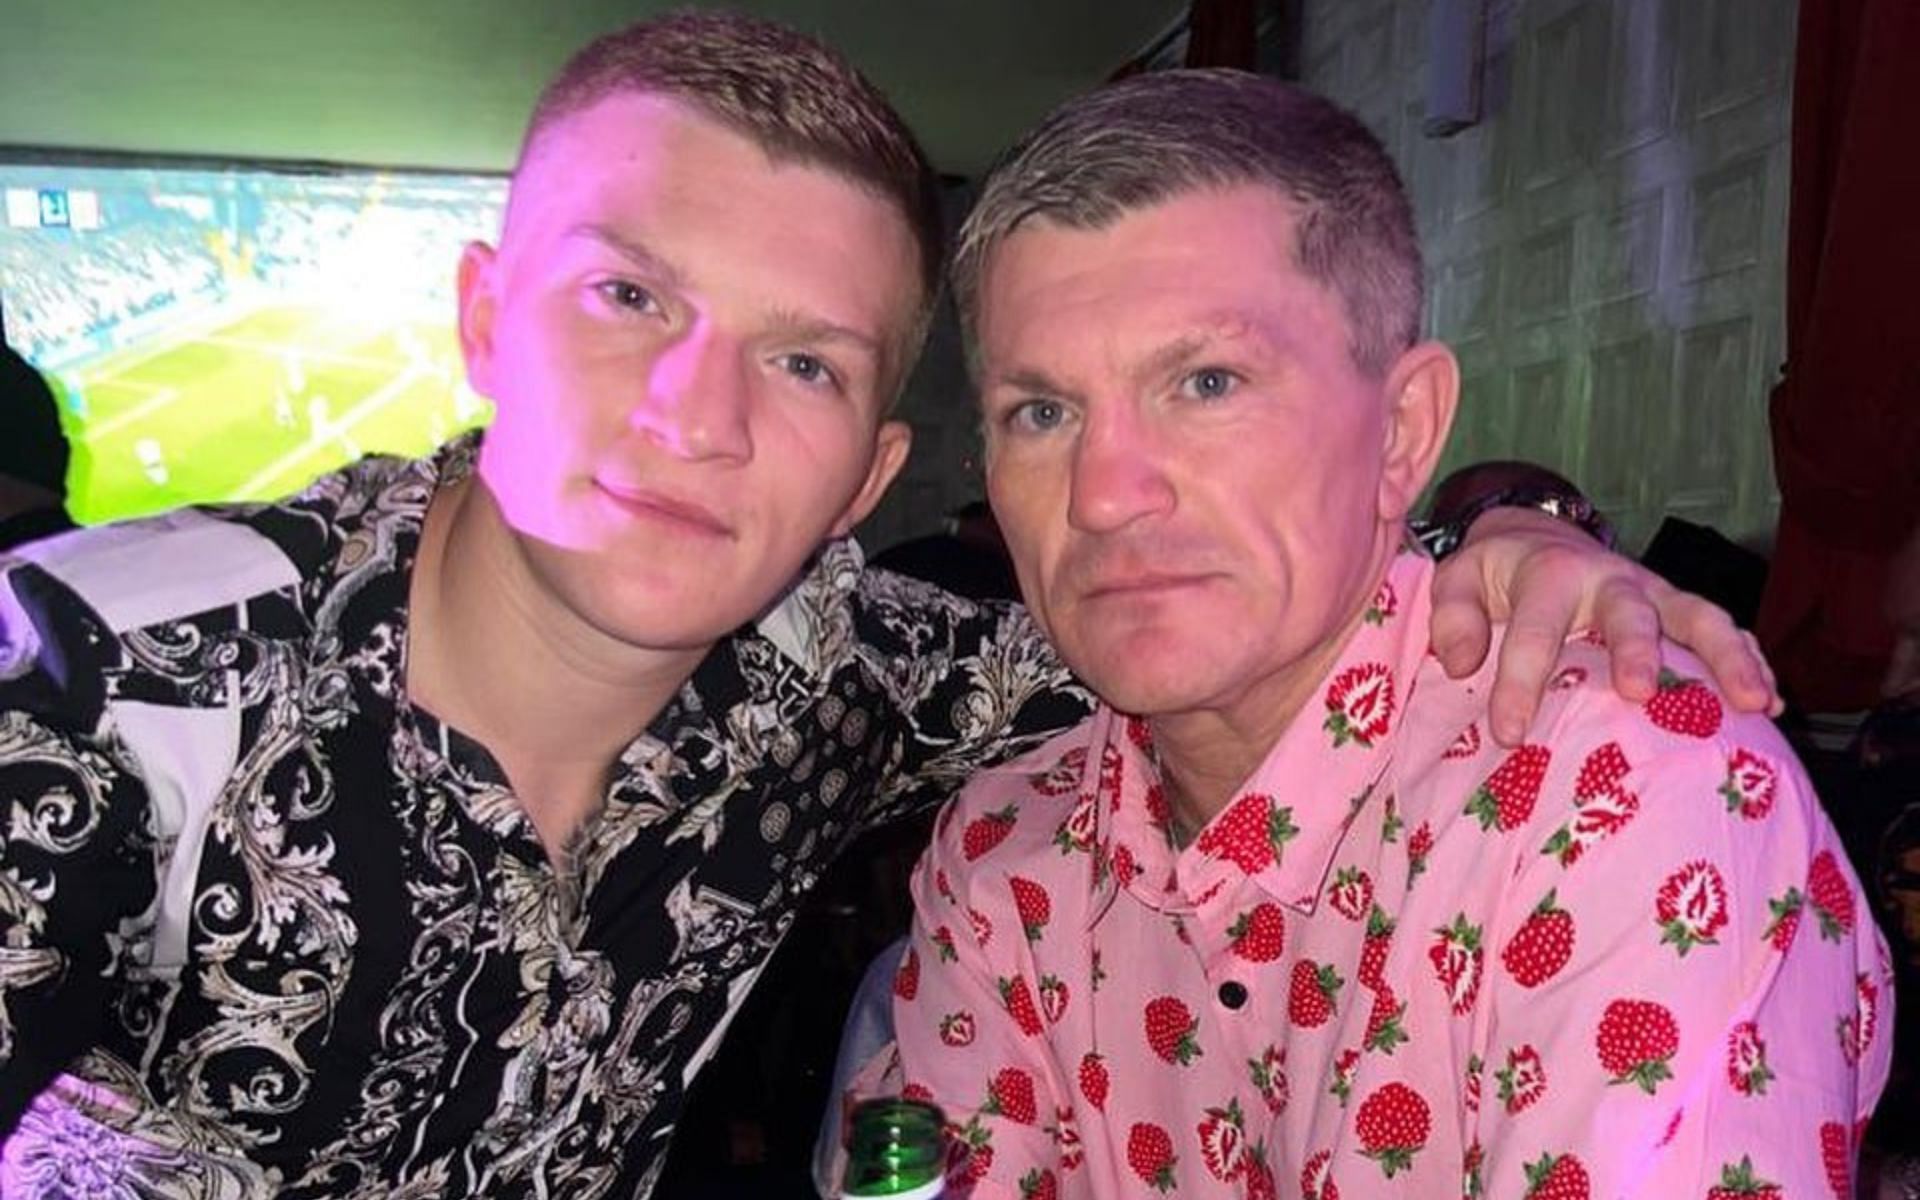 Ricky Hatton with his son Campbell [Image courtesy: @campbellhatton on Instagram]